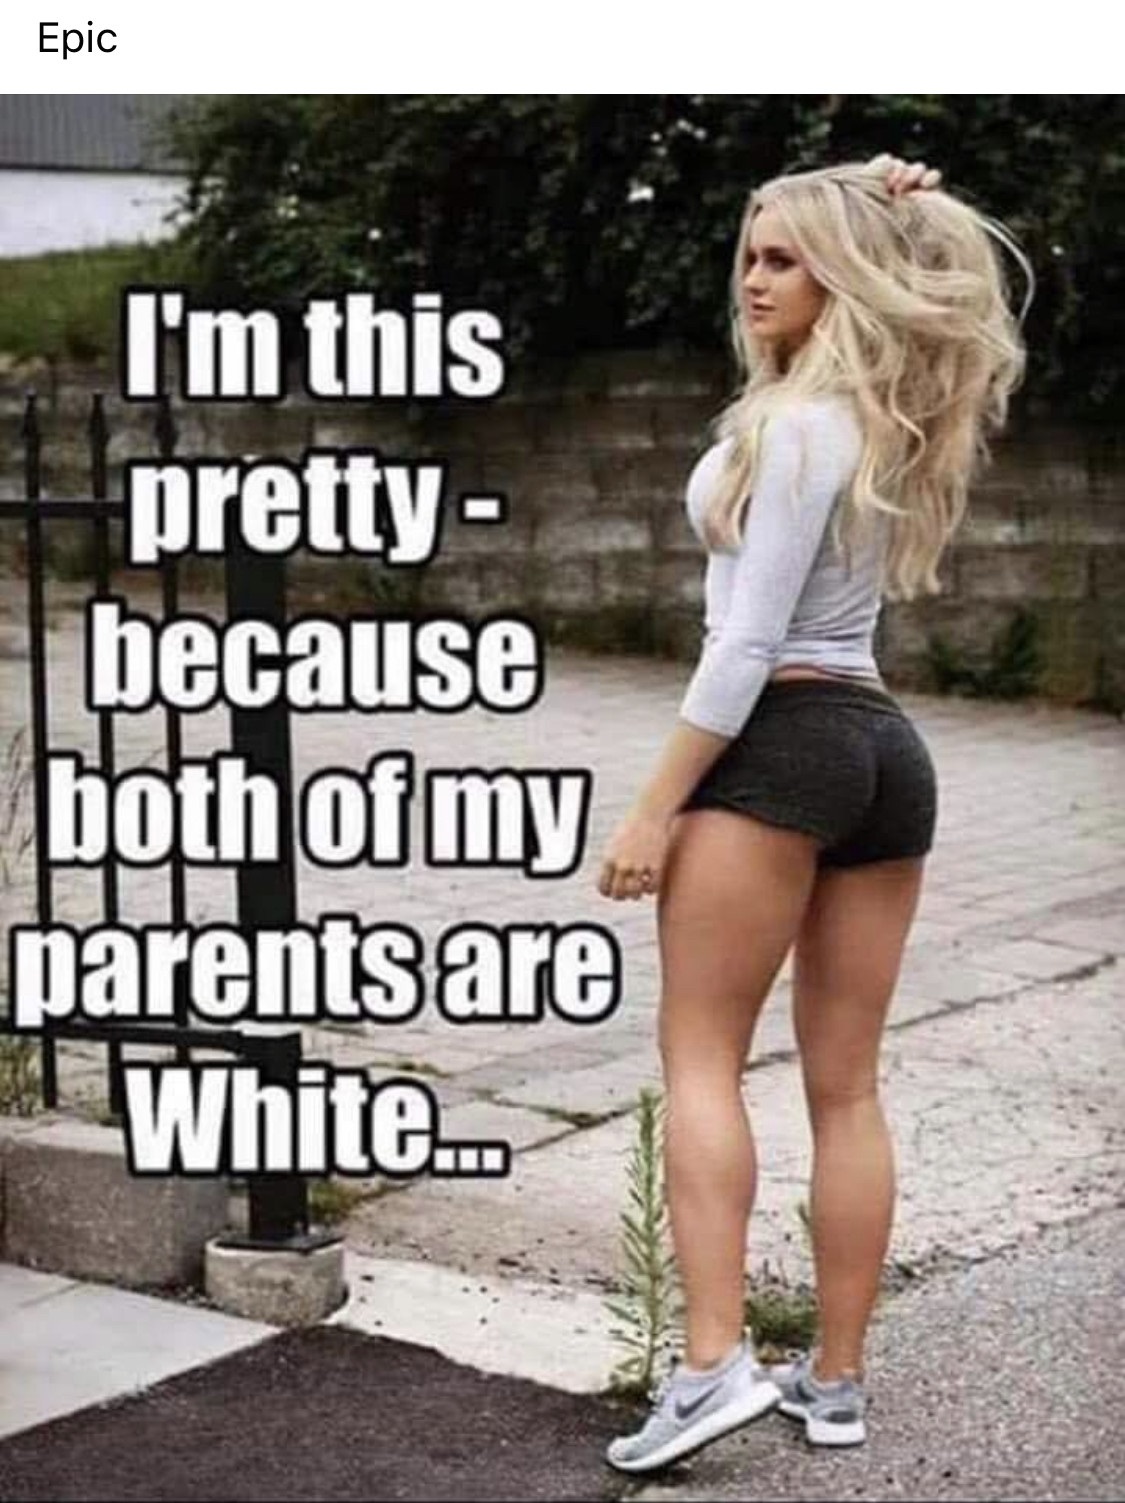 im this pretty because both my parents - Epic I'm this pretty because both of my parents are White...